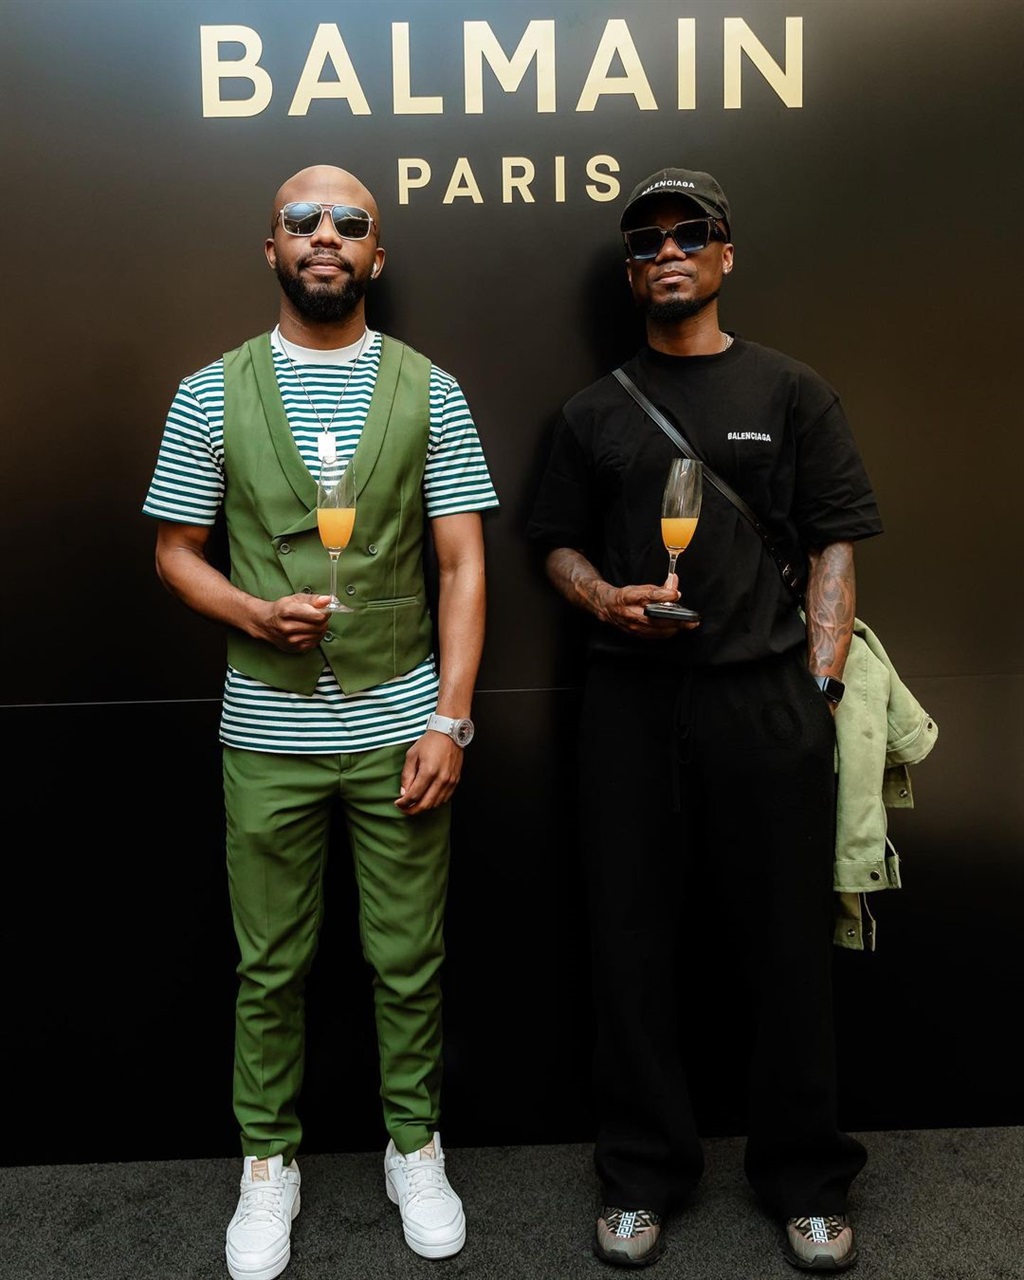 Teko Modise with a friend at the Balmain store ope